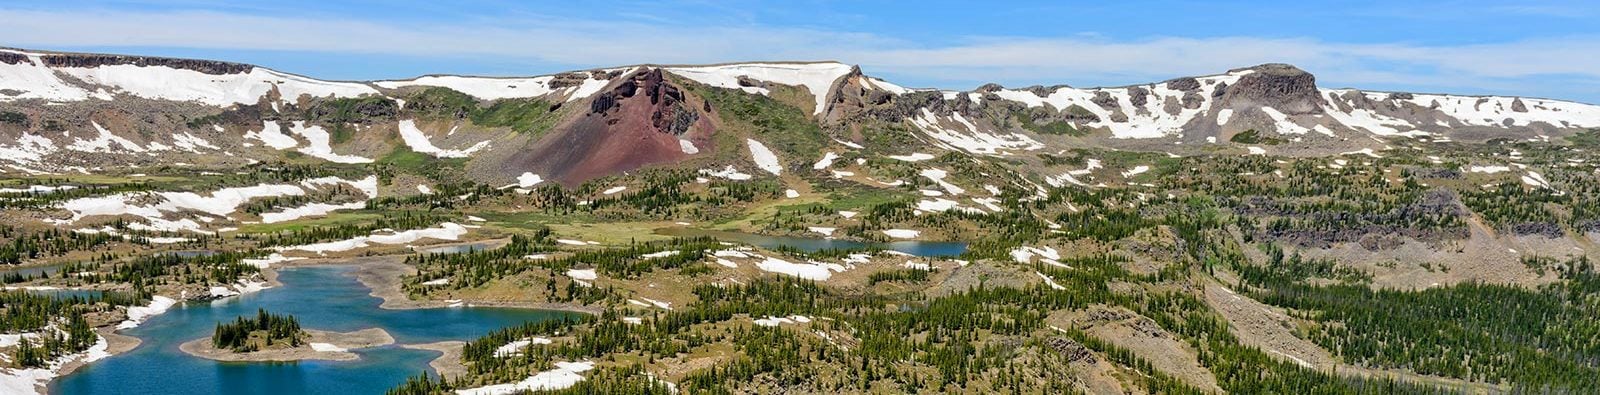 Panorama of the Flat Tops Wilderness in Colorado